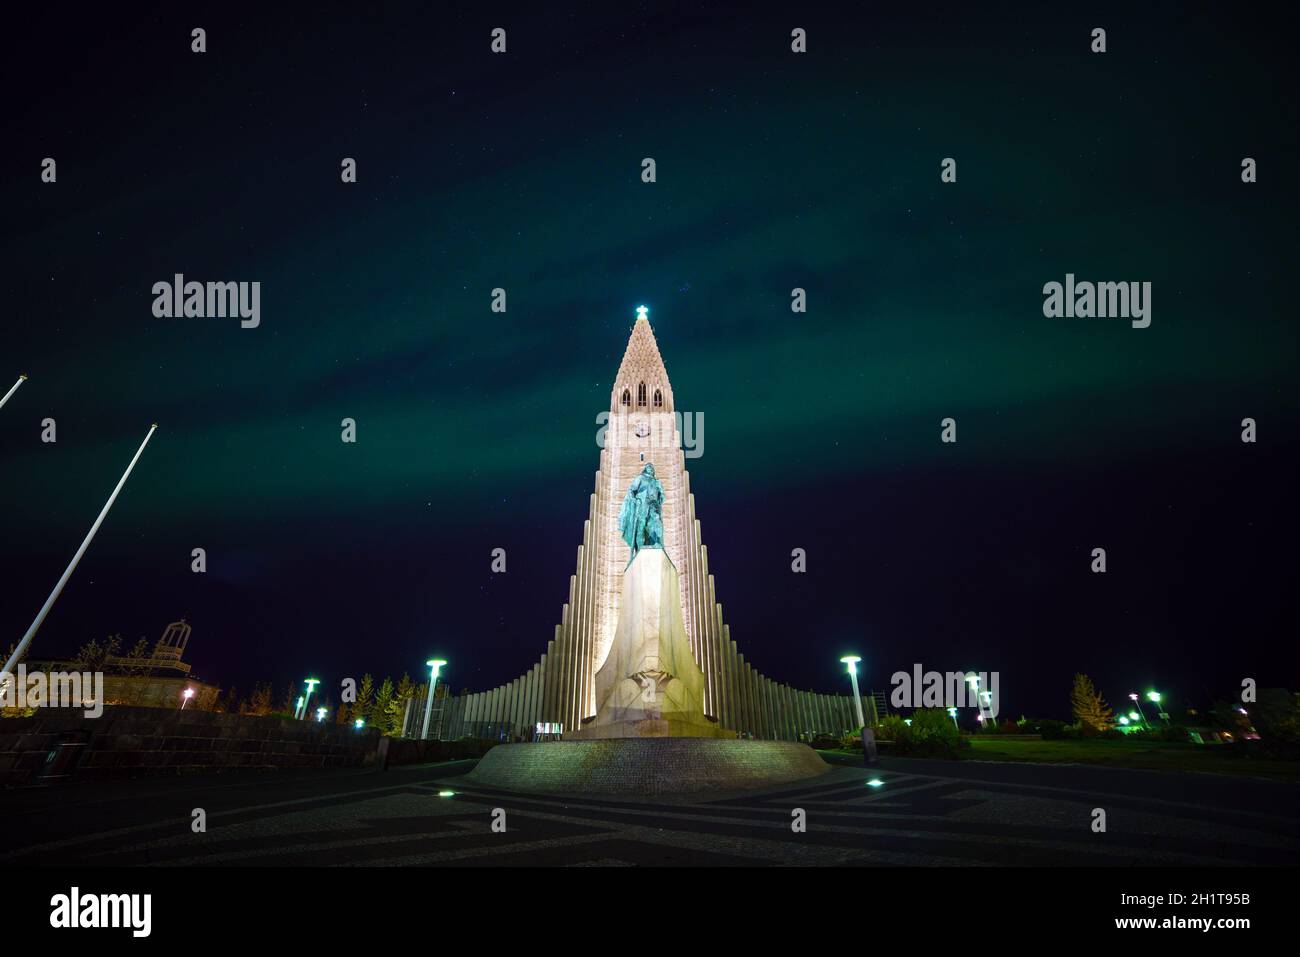 Northern lights shining over the church in Reykjavik Iceland Stock Photo